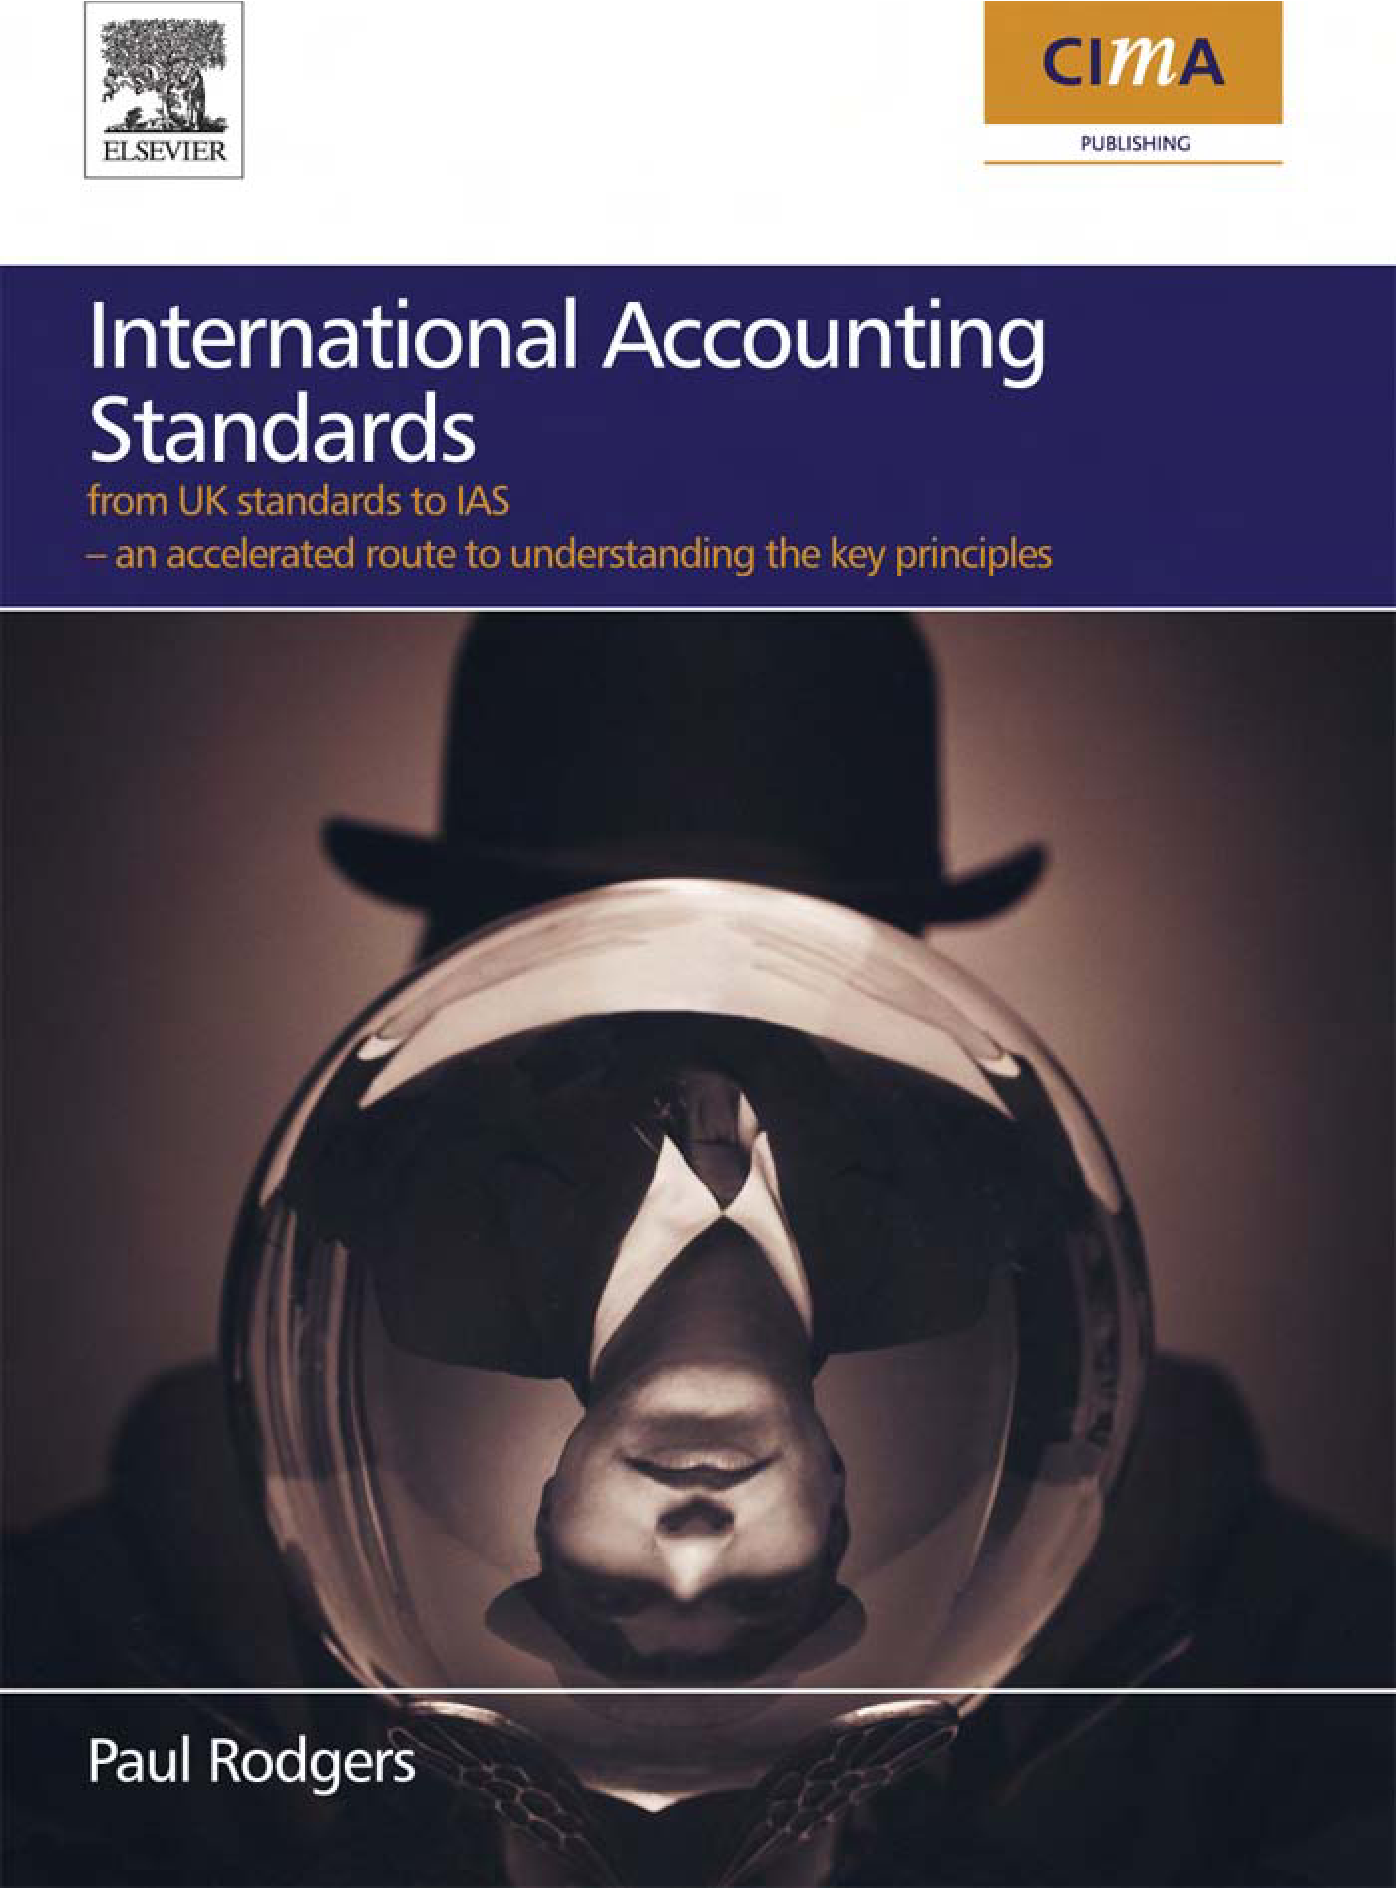 International accounting standards : from UK standards to IAS, an accelerated route to understanding the key principles